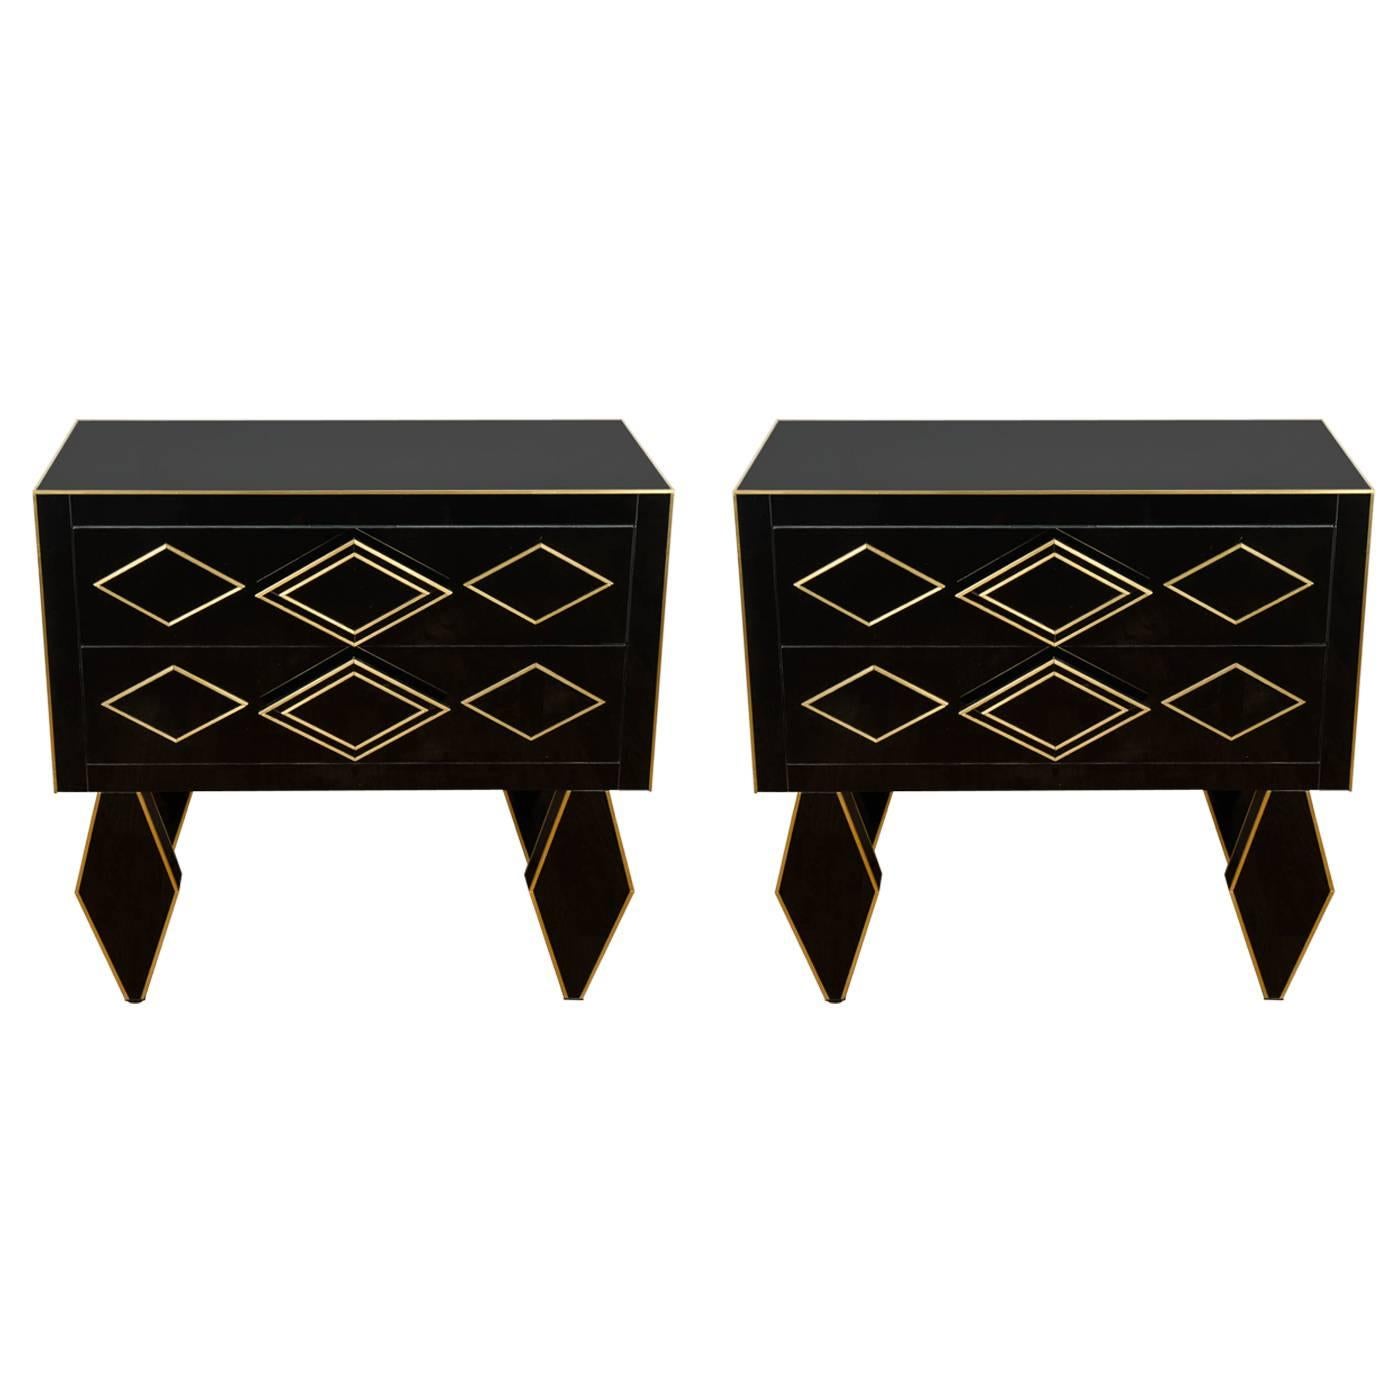 Pair of Nightstands in Teinted Glass and Brass